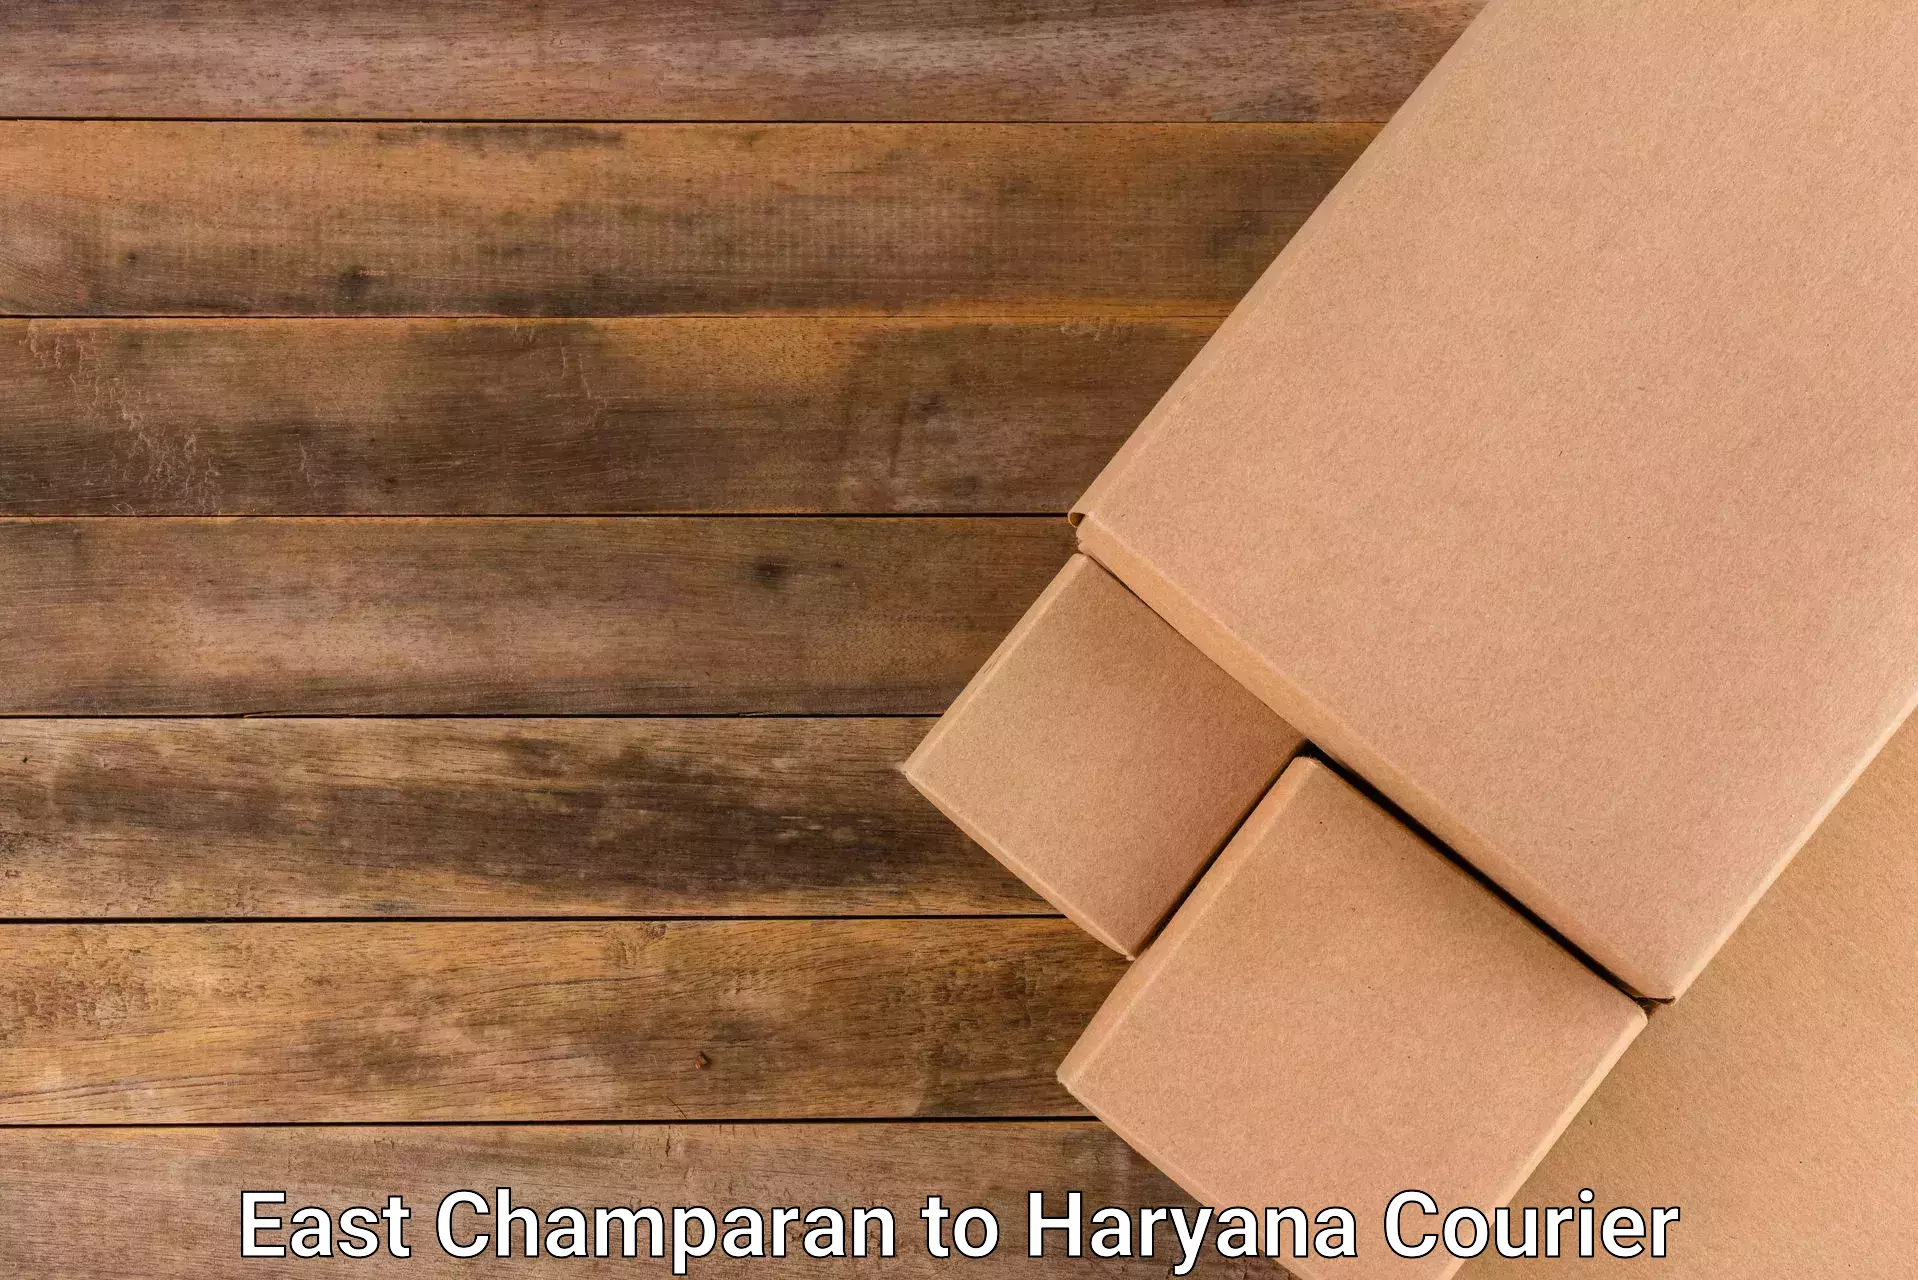 Holiday shipping services East Champaran to Gurgaon